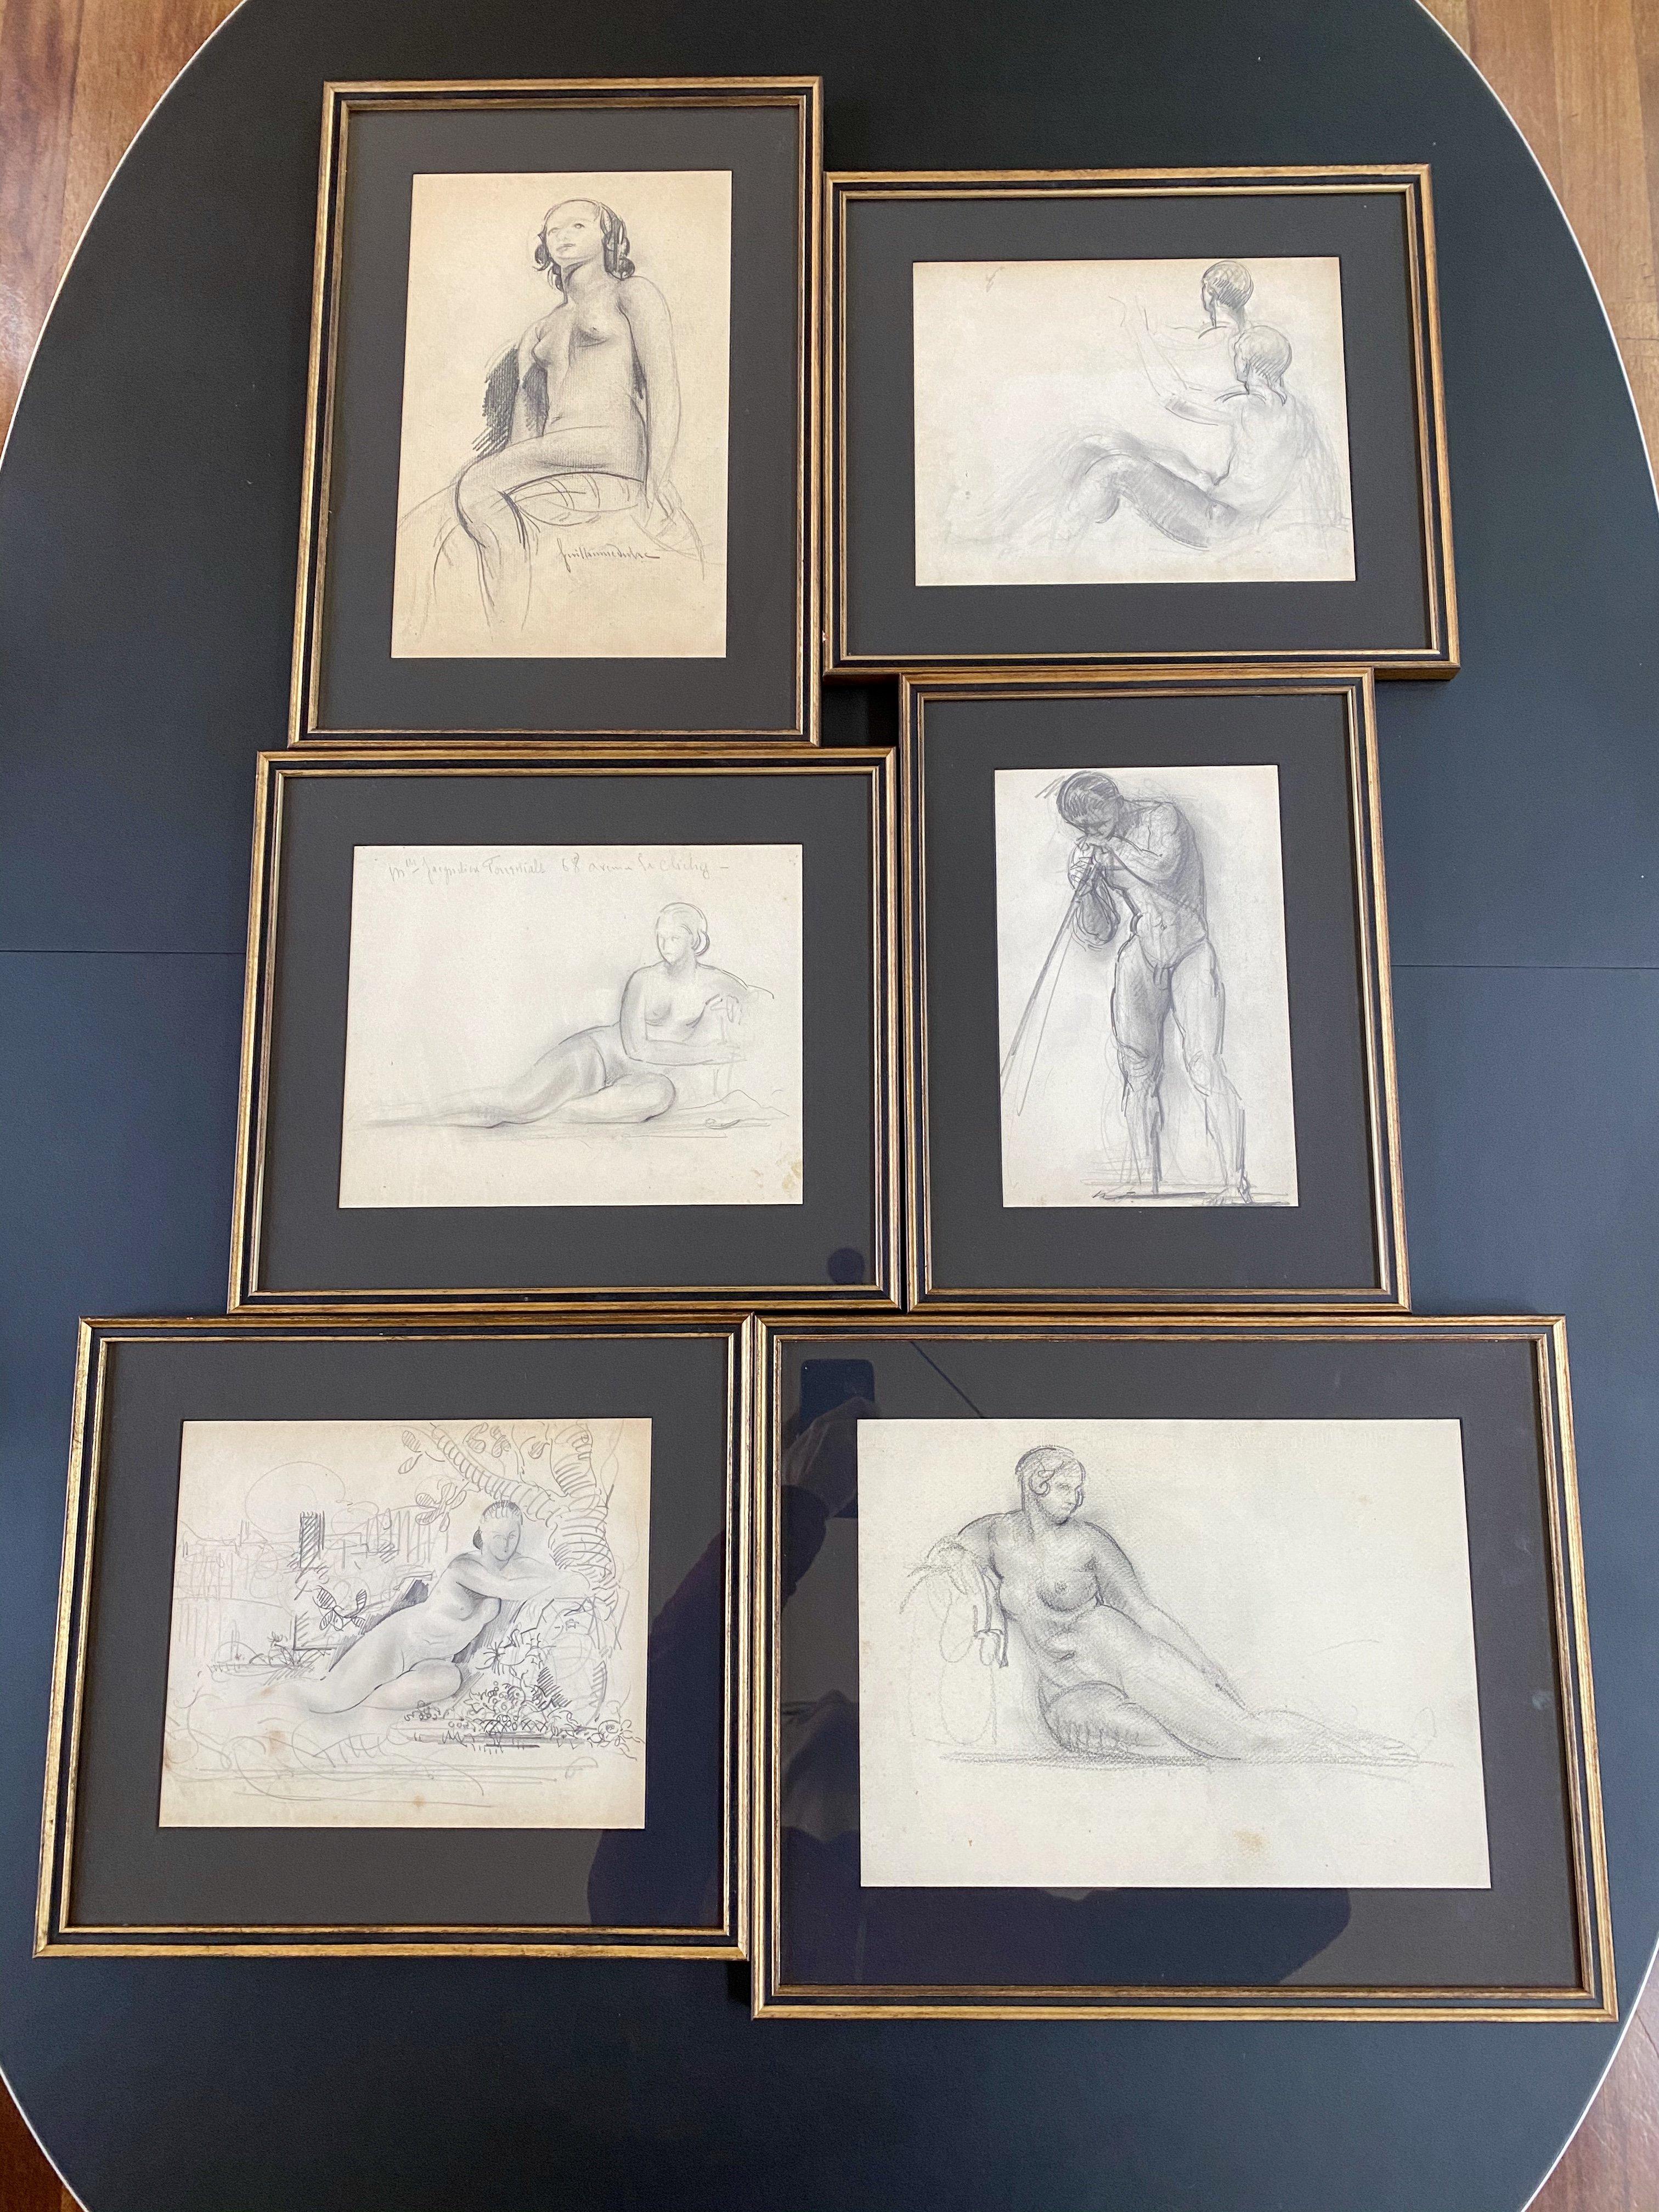 'The Seated Nude', pencil on fine art paper, by French artist, Guillaume Dulac (circa 1920s). An artist known for his exquisite drawings - many are sketches for his larger oil paintings or other works - this piece is compelling because its image